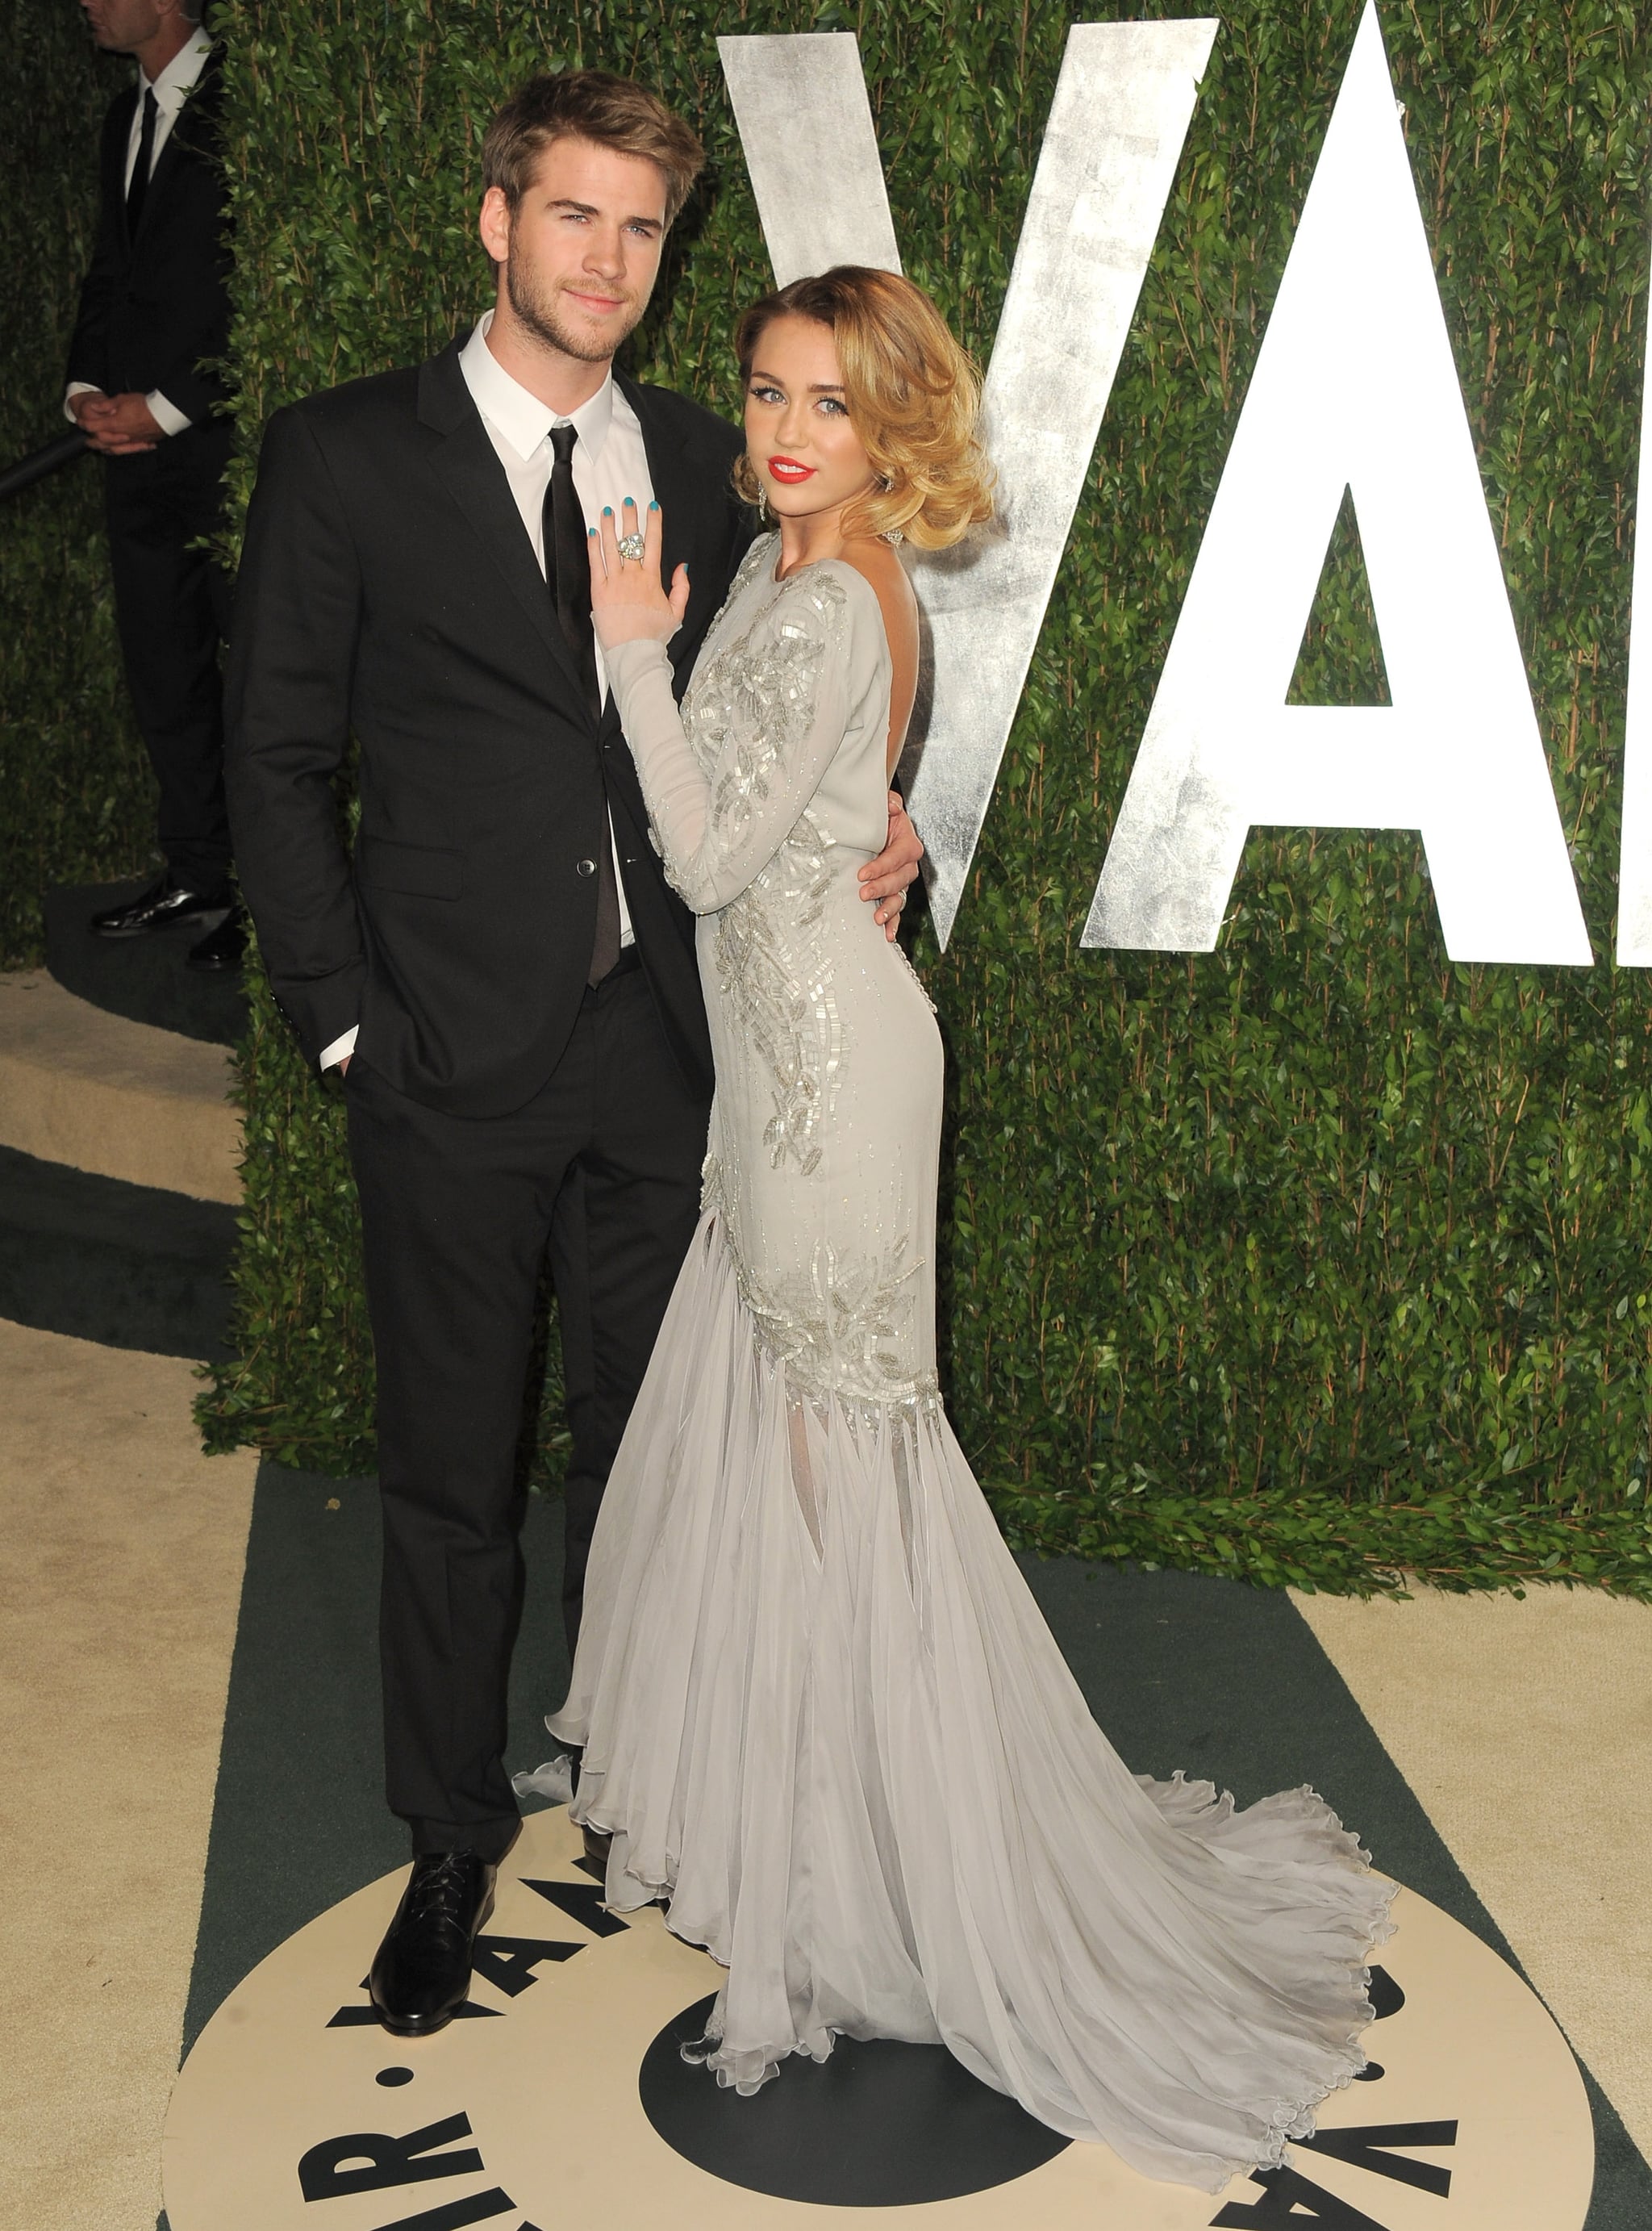 Miley holds on to her man Liam at the Vanity Fair party.